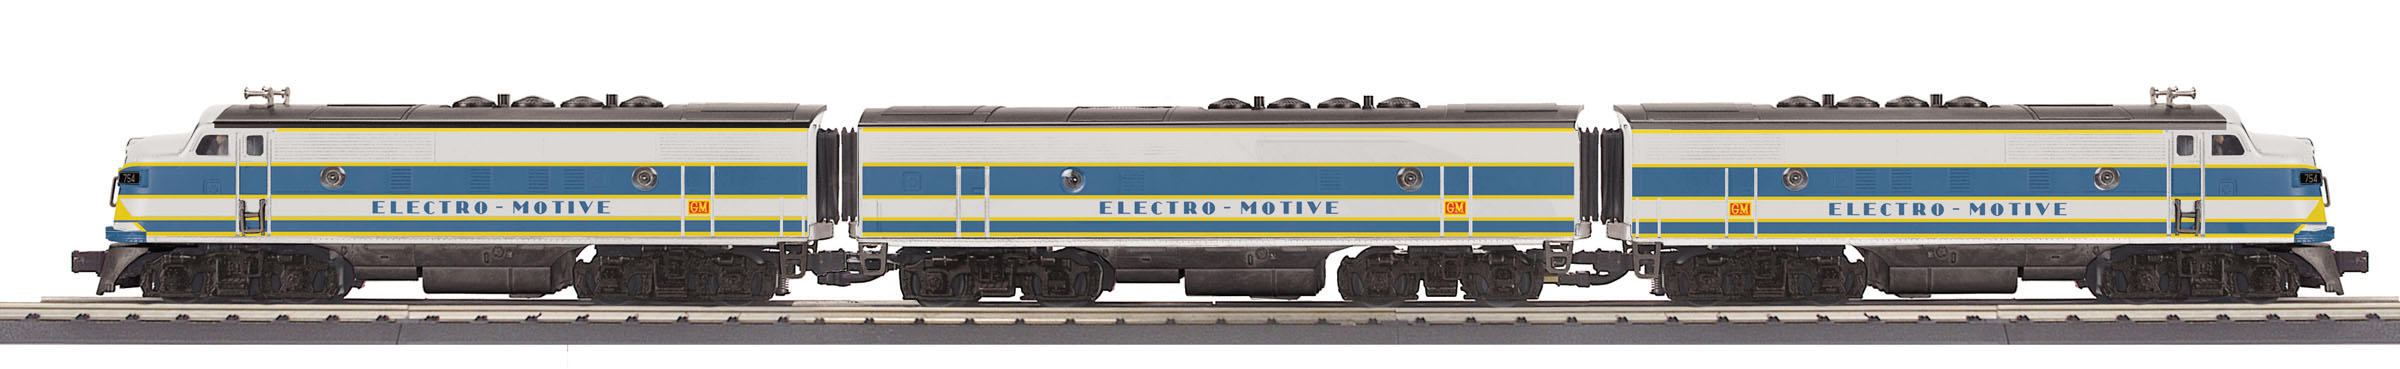 30-20819-1 | MTH ELECTRIC TRAINS